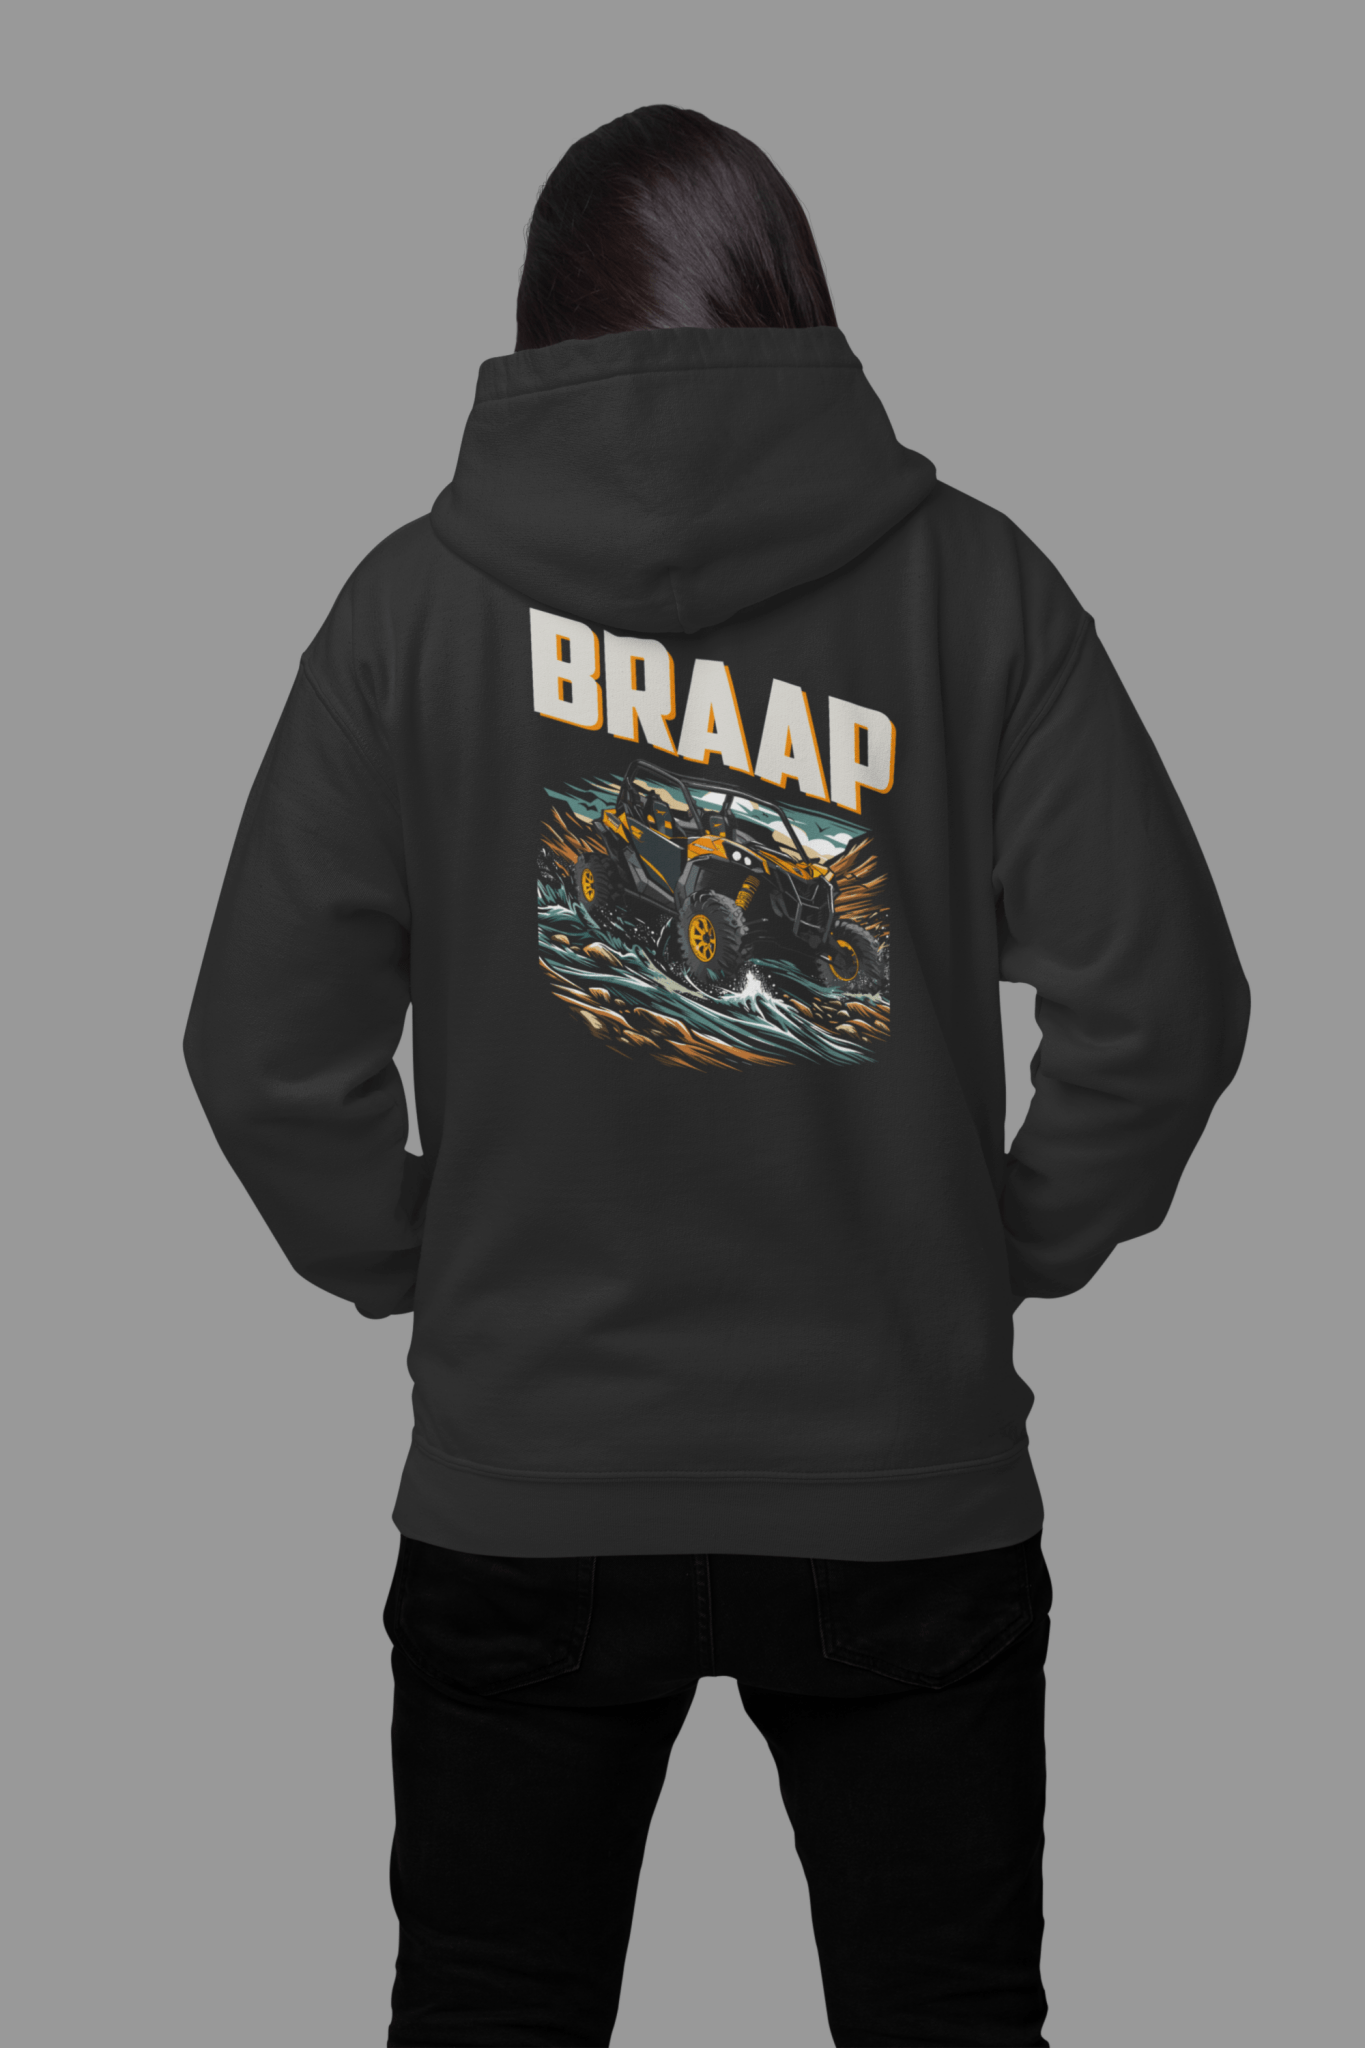 BRAAP Side-by-Side Apparel for Men and Women - Goats Trail Off-Road Apparel Company